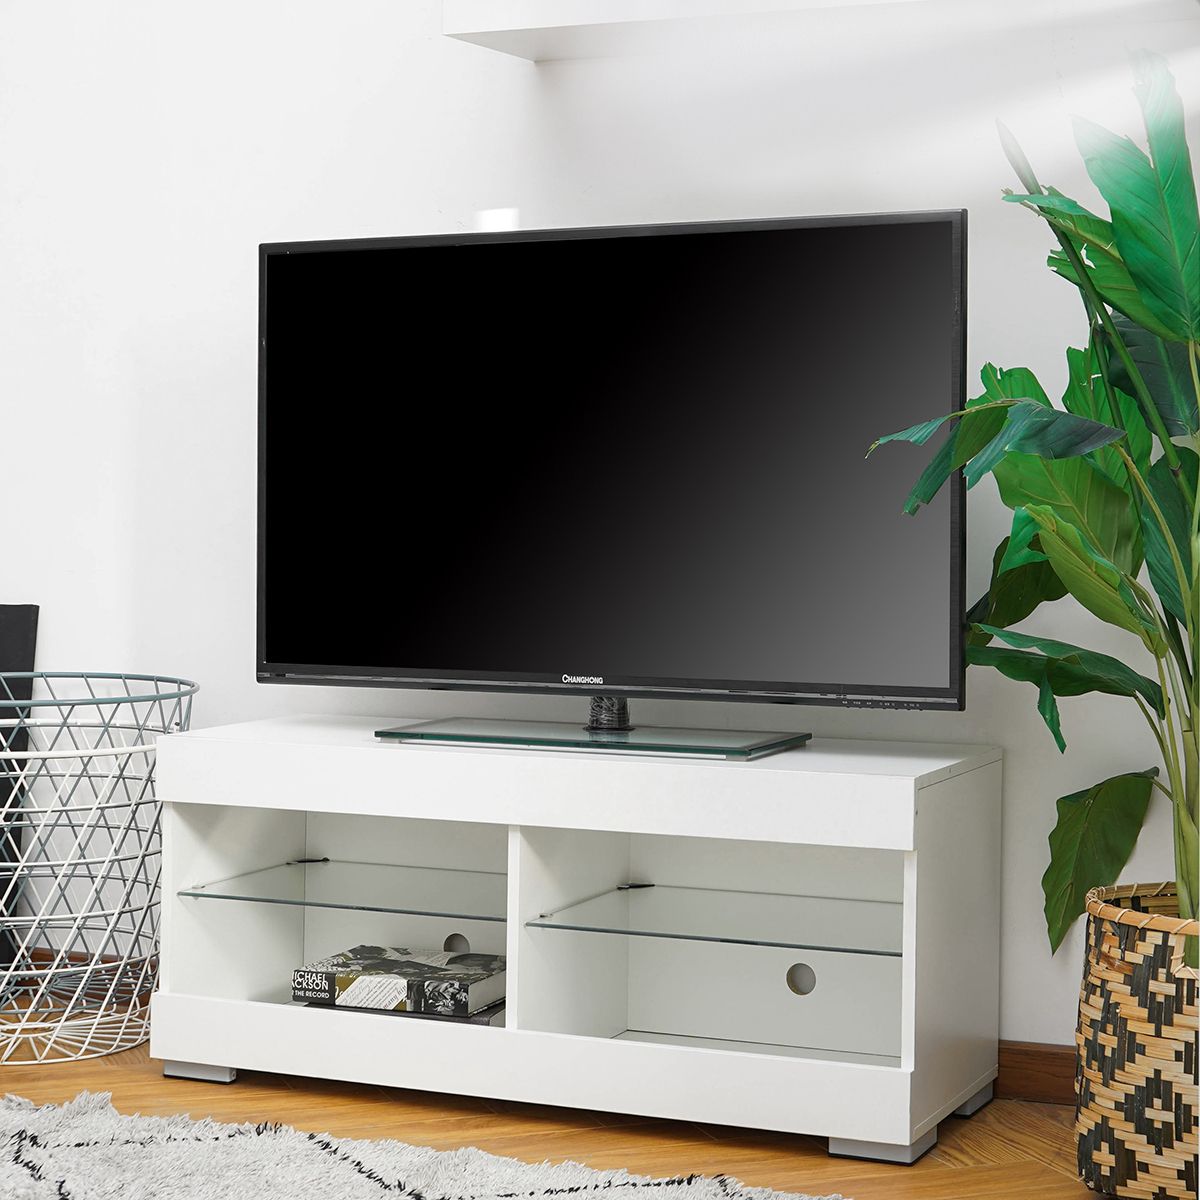 Wood Television Stand Modern Tv Stand Cabinet With Led Inside Contemporary Wood Tv Stands (View 2 of 15)